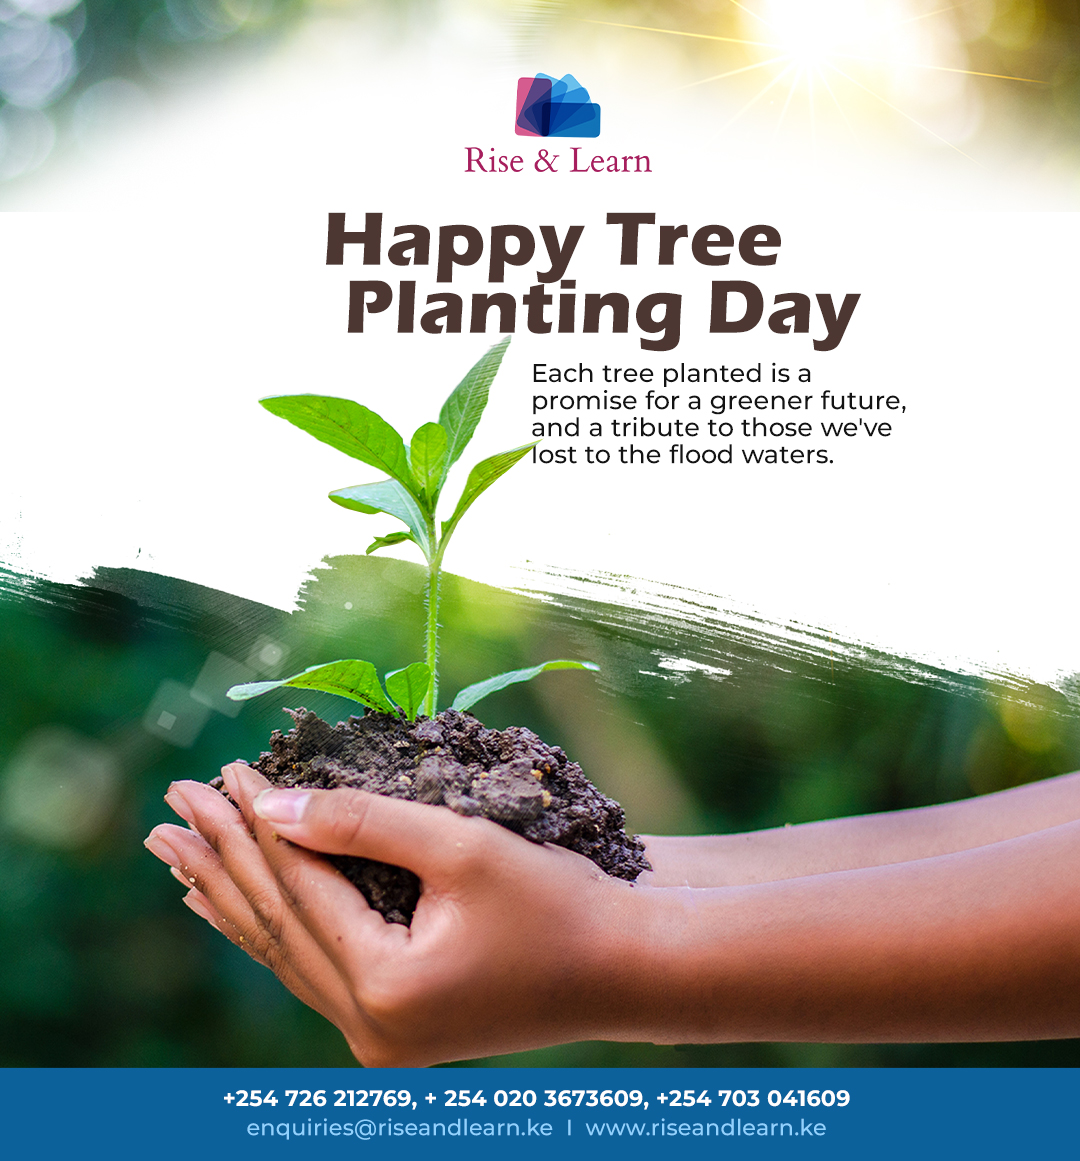 Happy Tree Planting Day!

Let's embrace this opportunity to sow the seeds of a better tomorrow. Together, our actions today will create a greener, more sustainable future for all.

#PlantATree